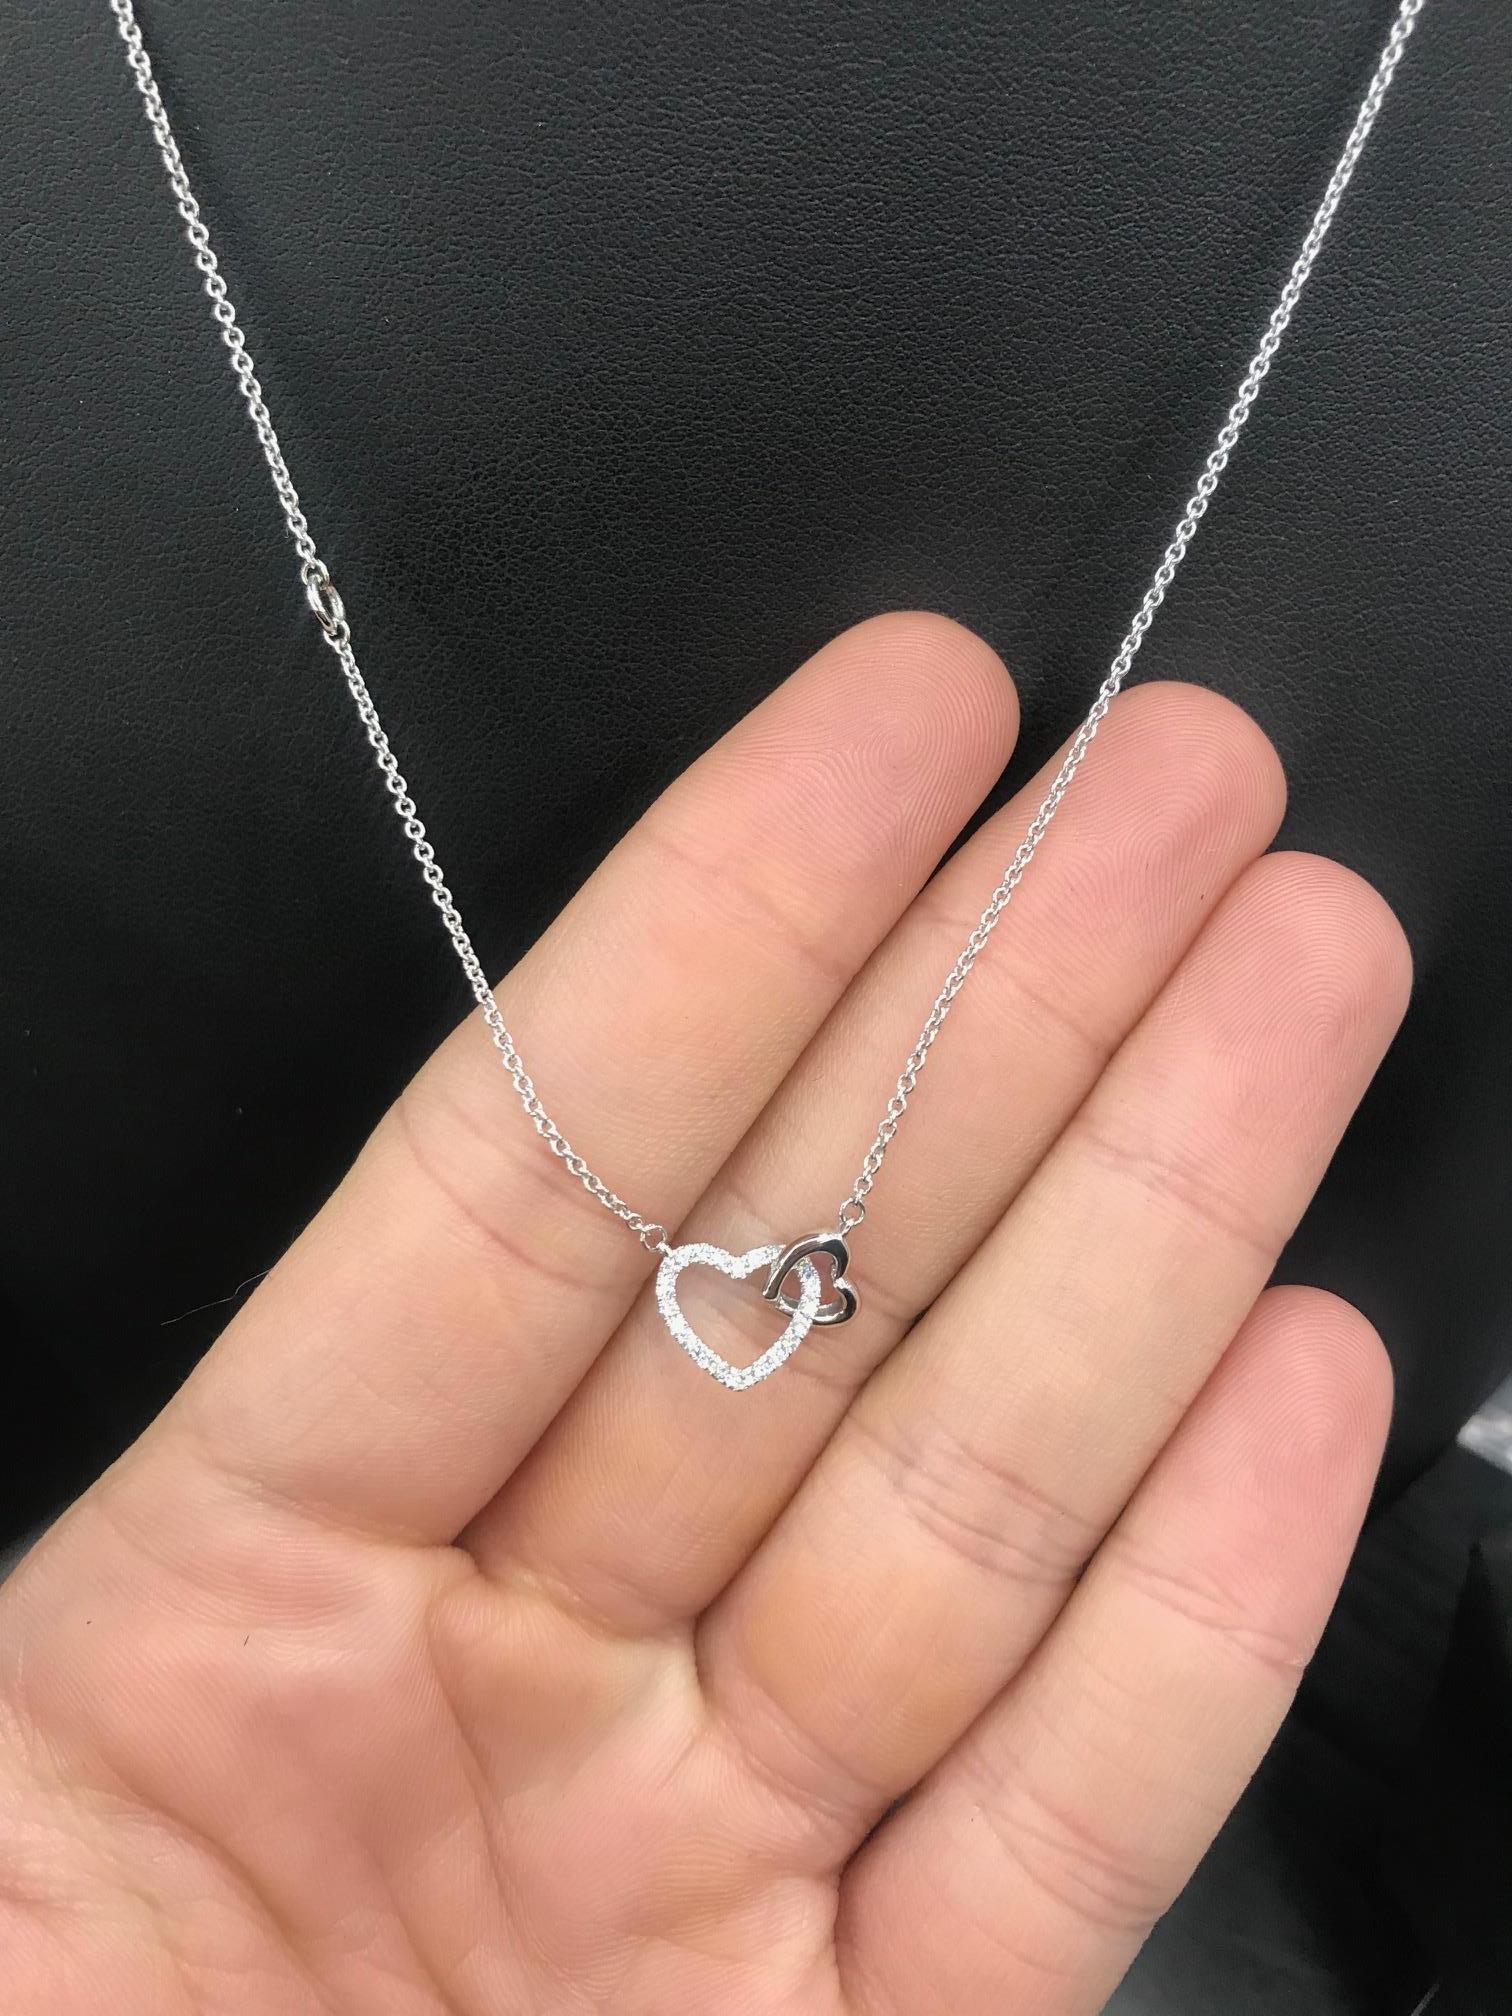 14K White gold double heart necklace featuring round brilliants weighing 0.11 carats.